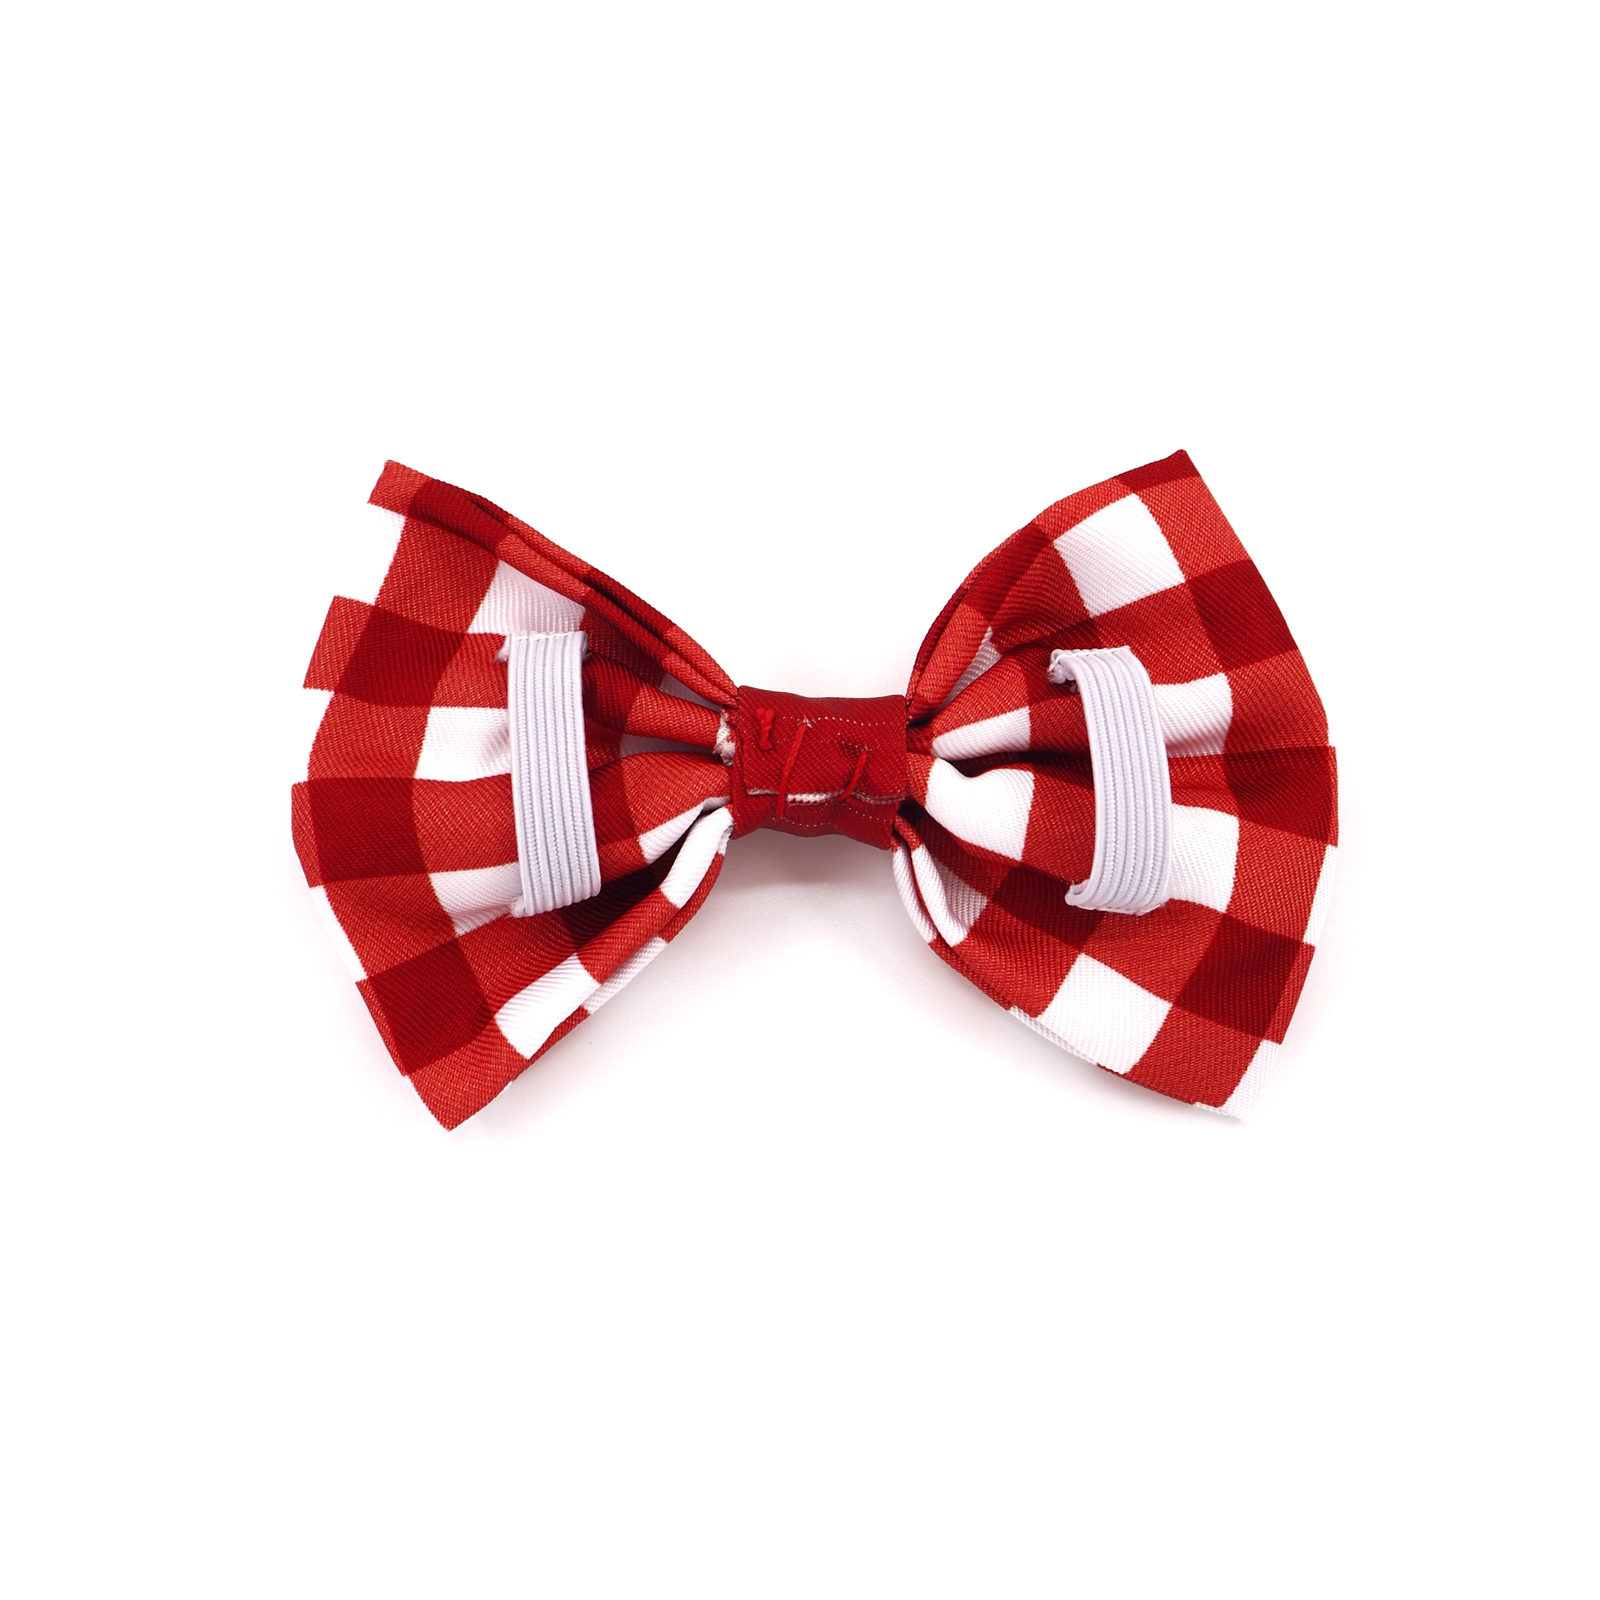 Pupstyle Xmas Dog Bow Tie Red Gingham